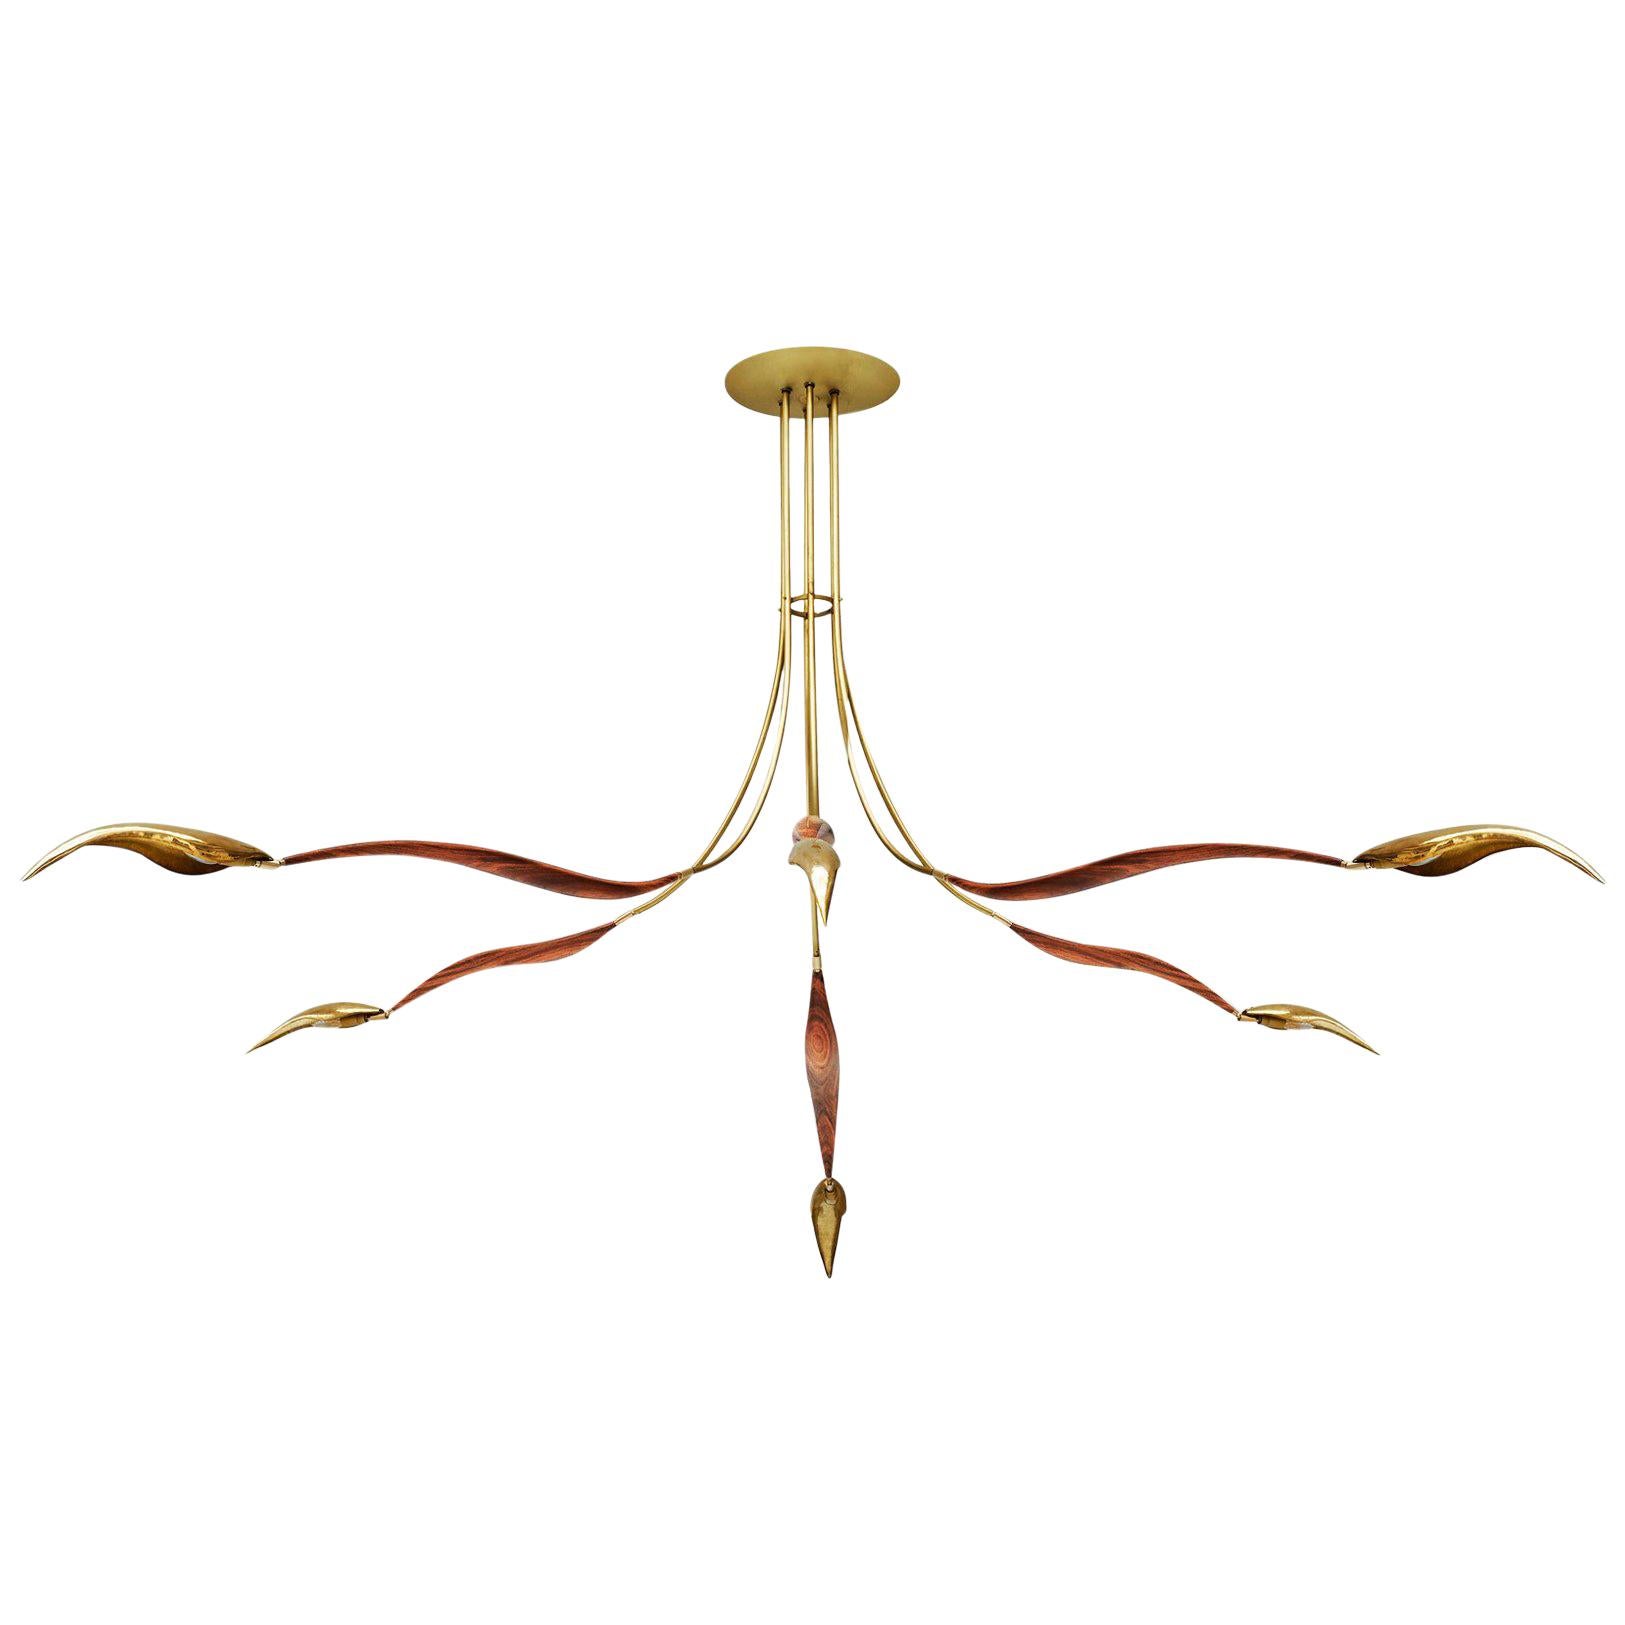 Contemporary Chrysalide Chandelier, Wood and Brass, Oma Light Design, Spain